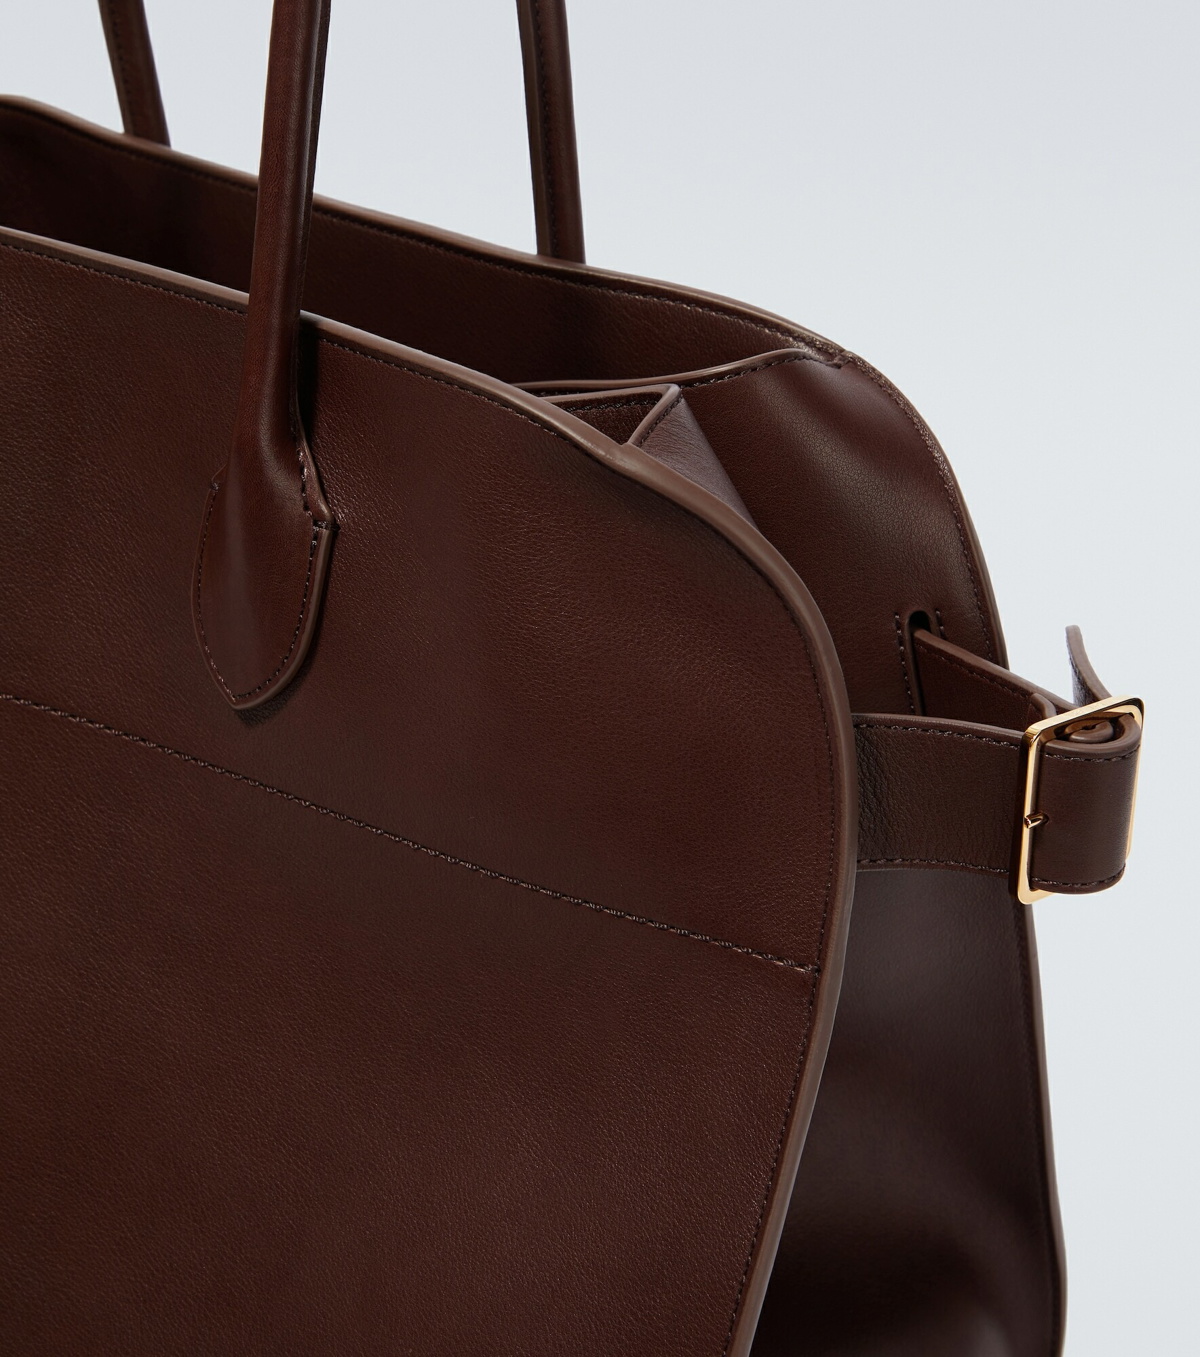 The Row Margaux 17 Top-Handle Bag